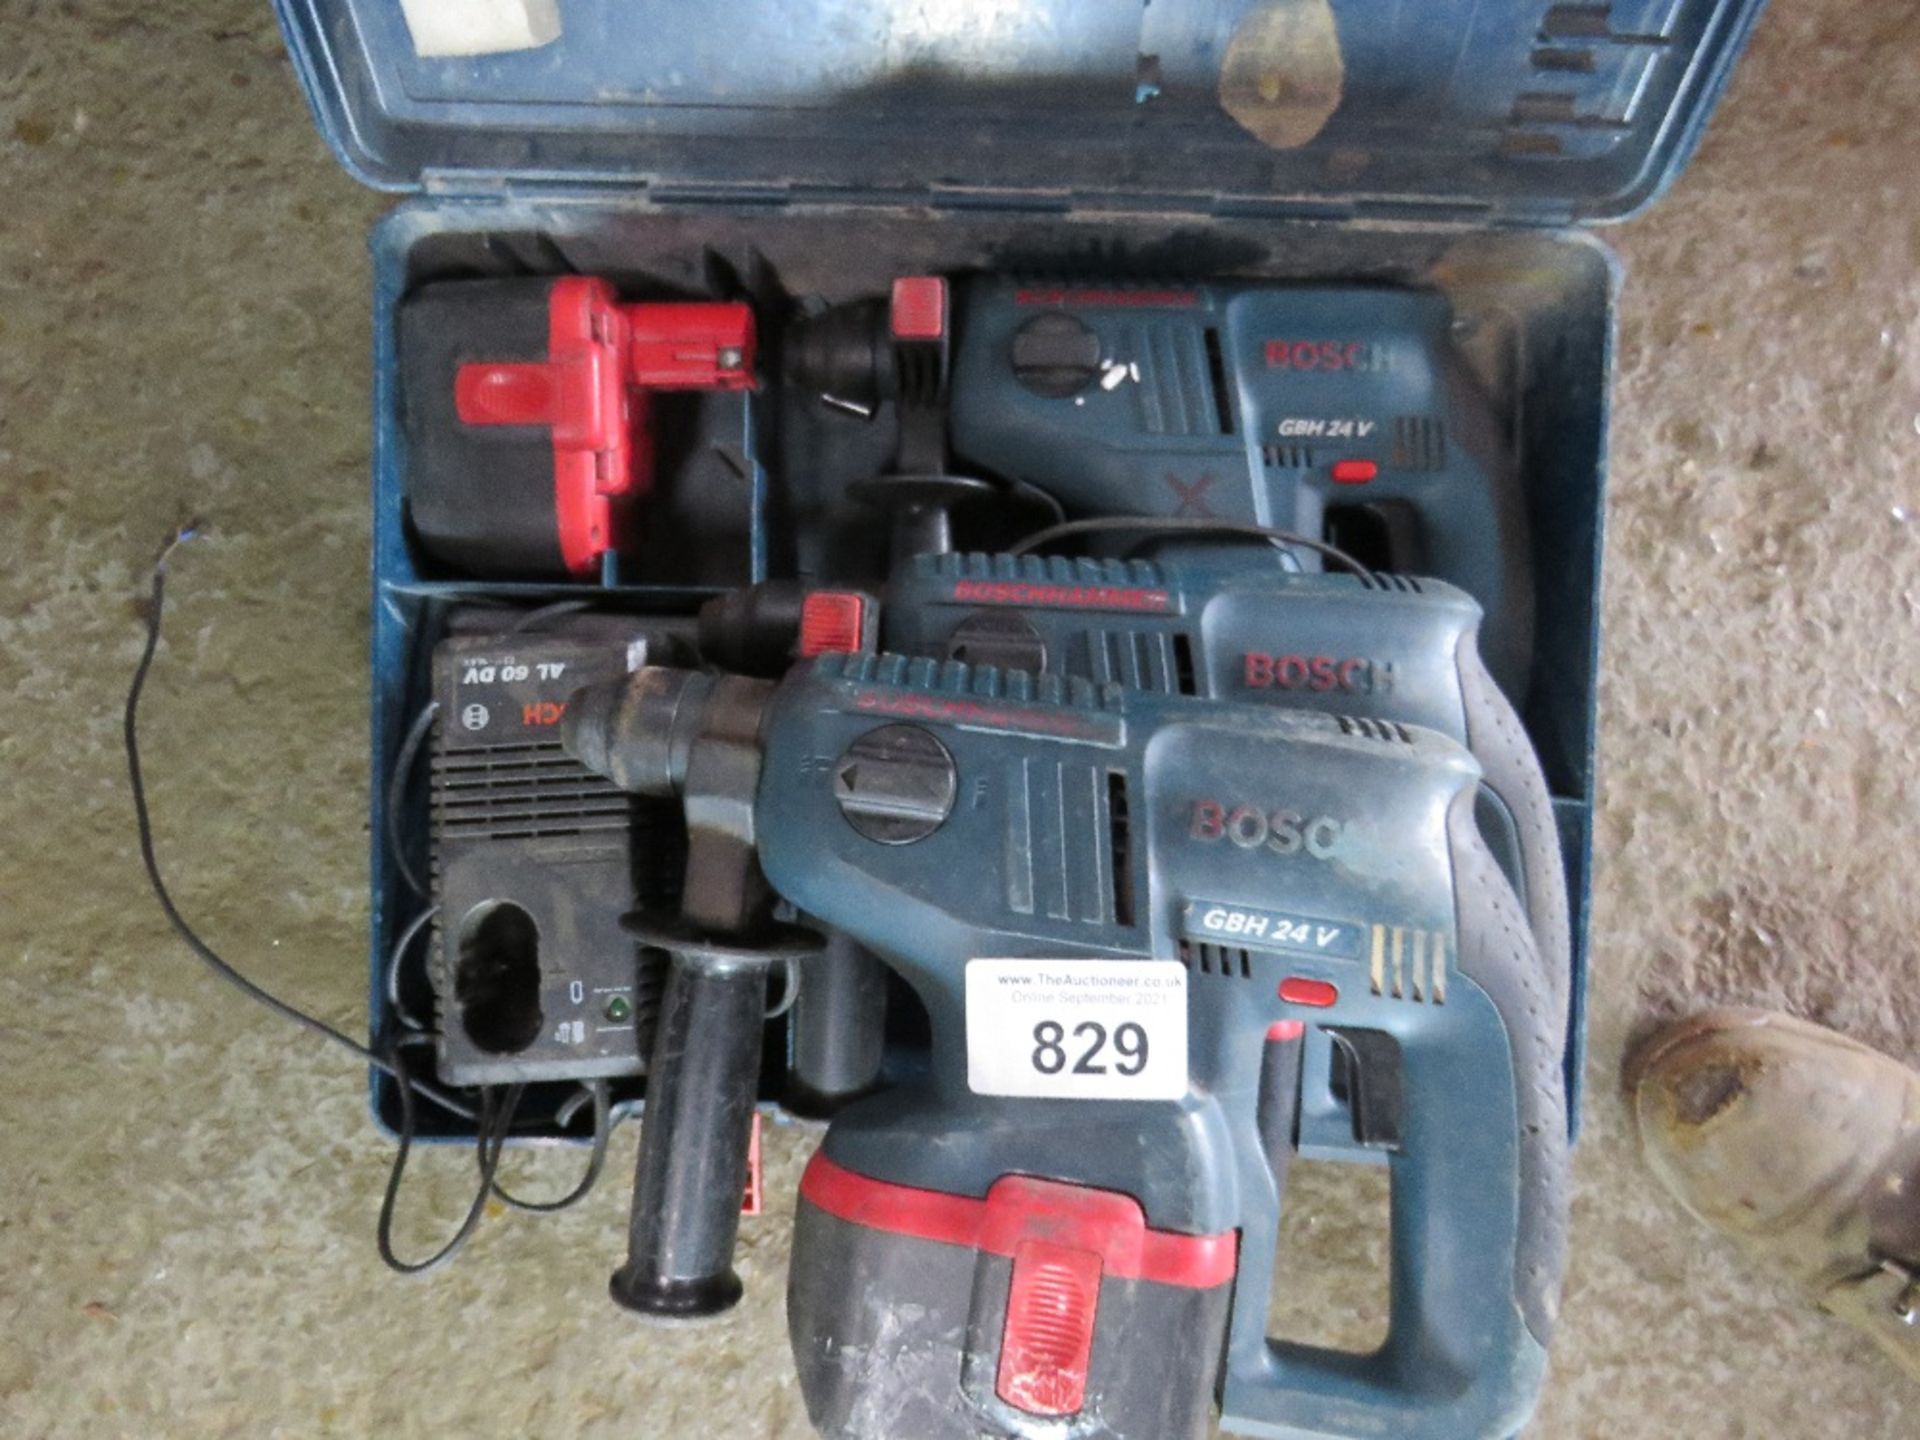 3 X BOSCH 24VOLT DRILLS. BEEN IN LONG TERM STORAGE, UNTESTED, CONDITION UNKNOWN.